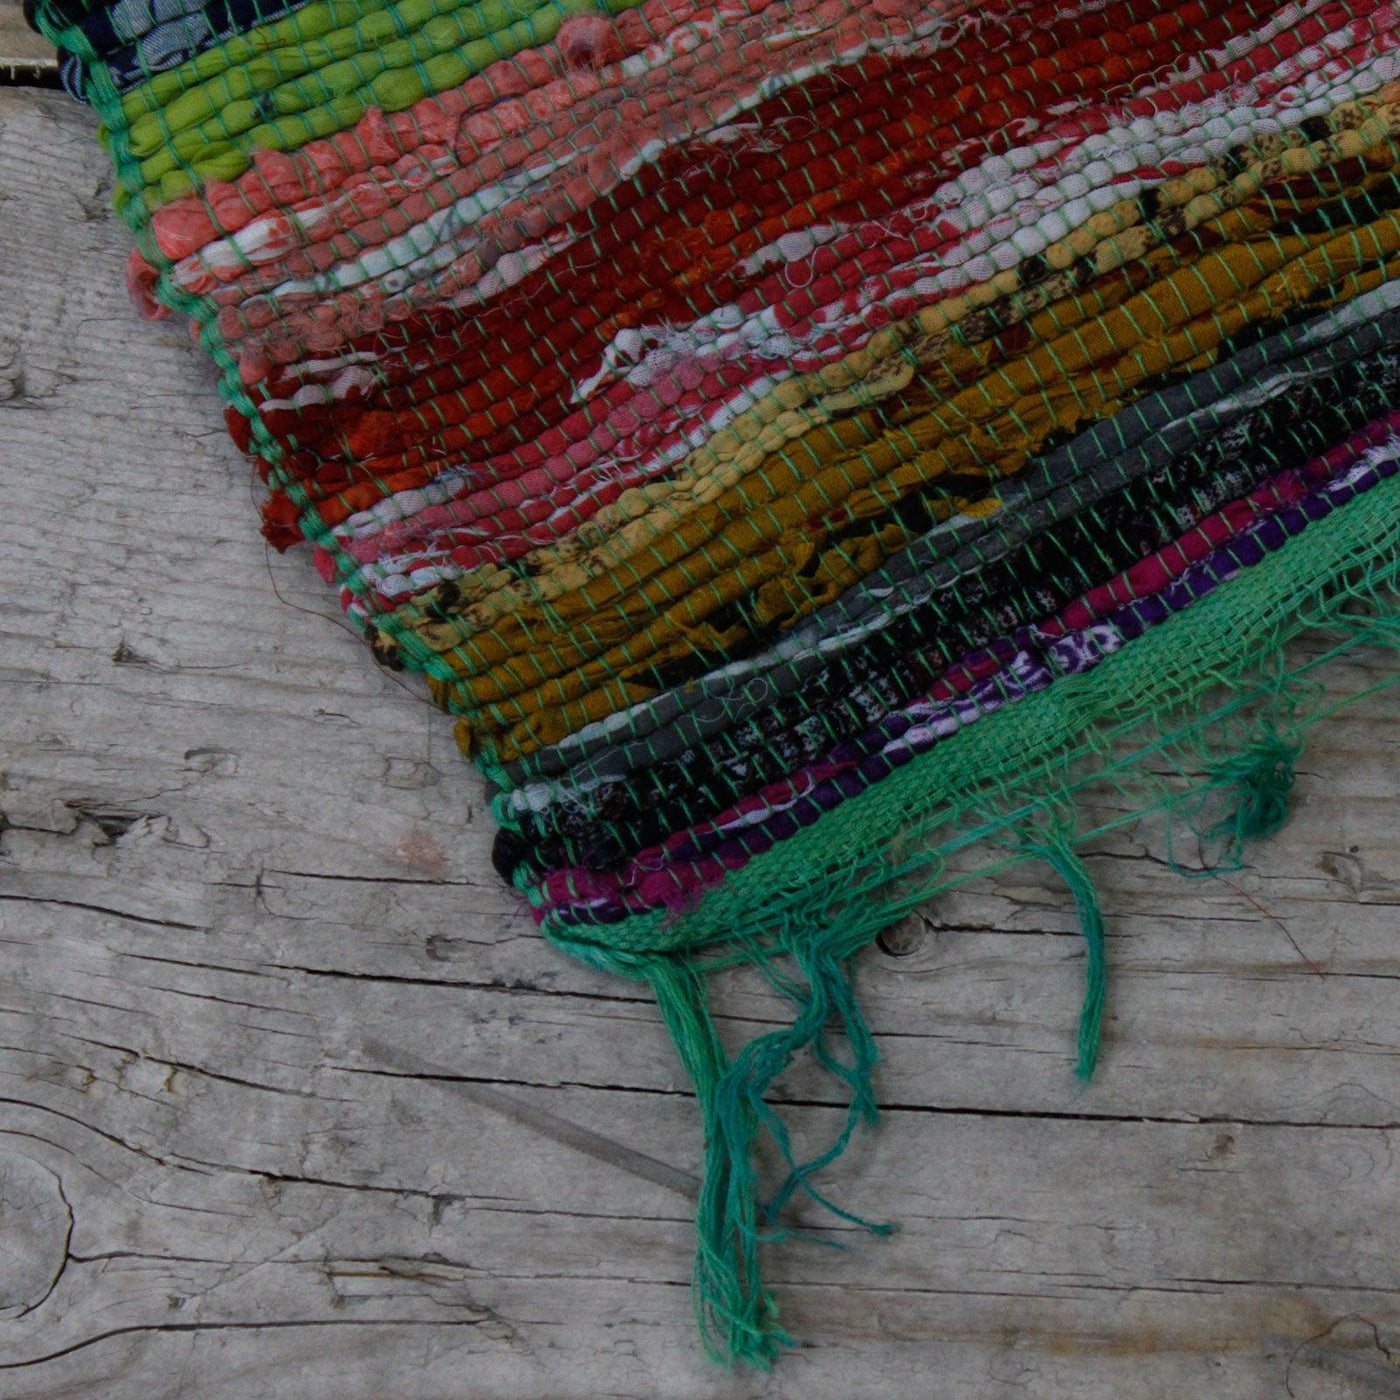 Eco Friendly Multicolour Stripped Indian Rag Rugs Green Accent 151 x 90cm. 